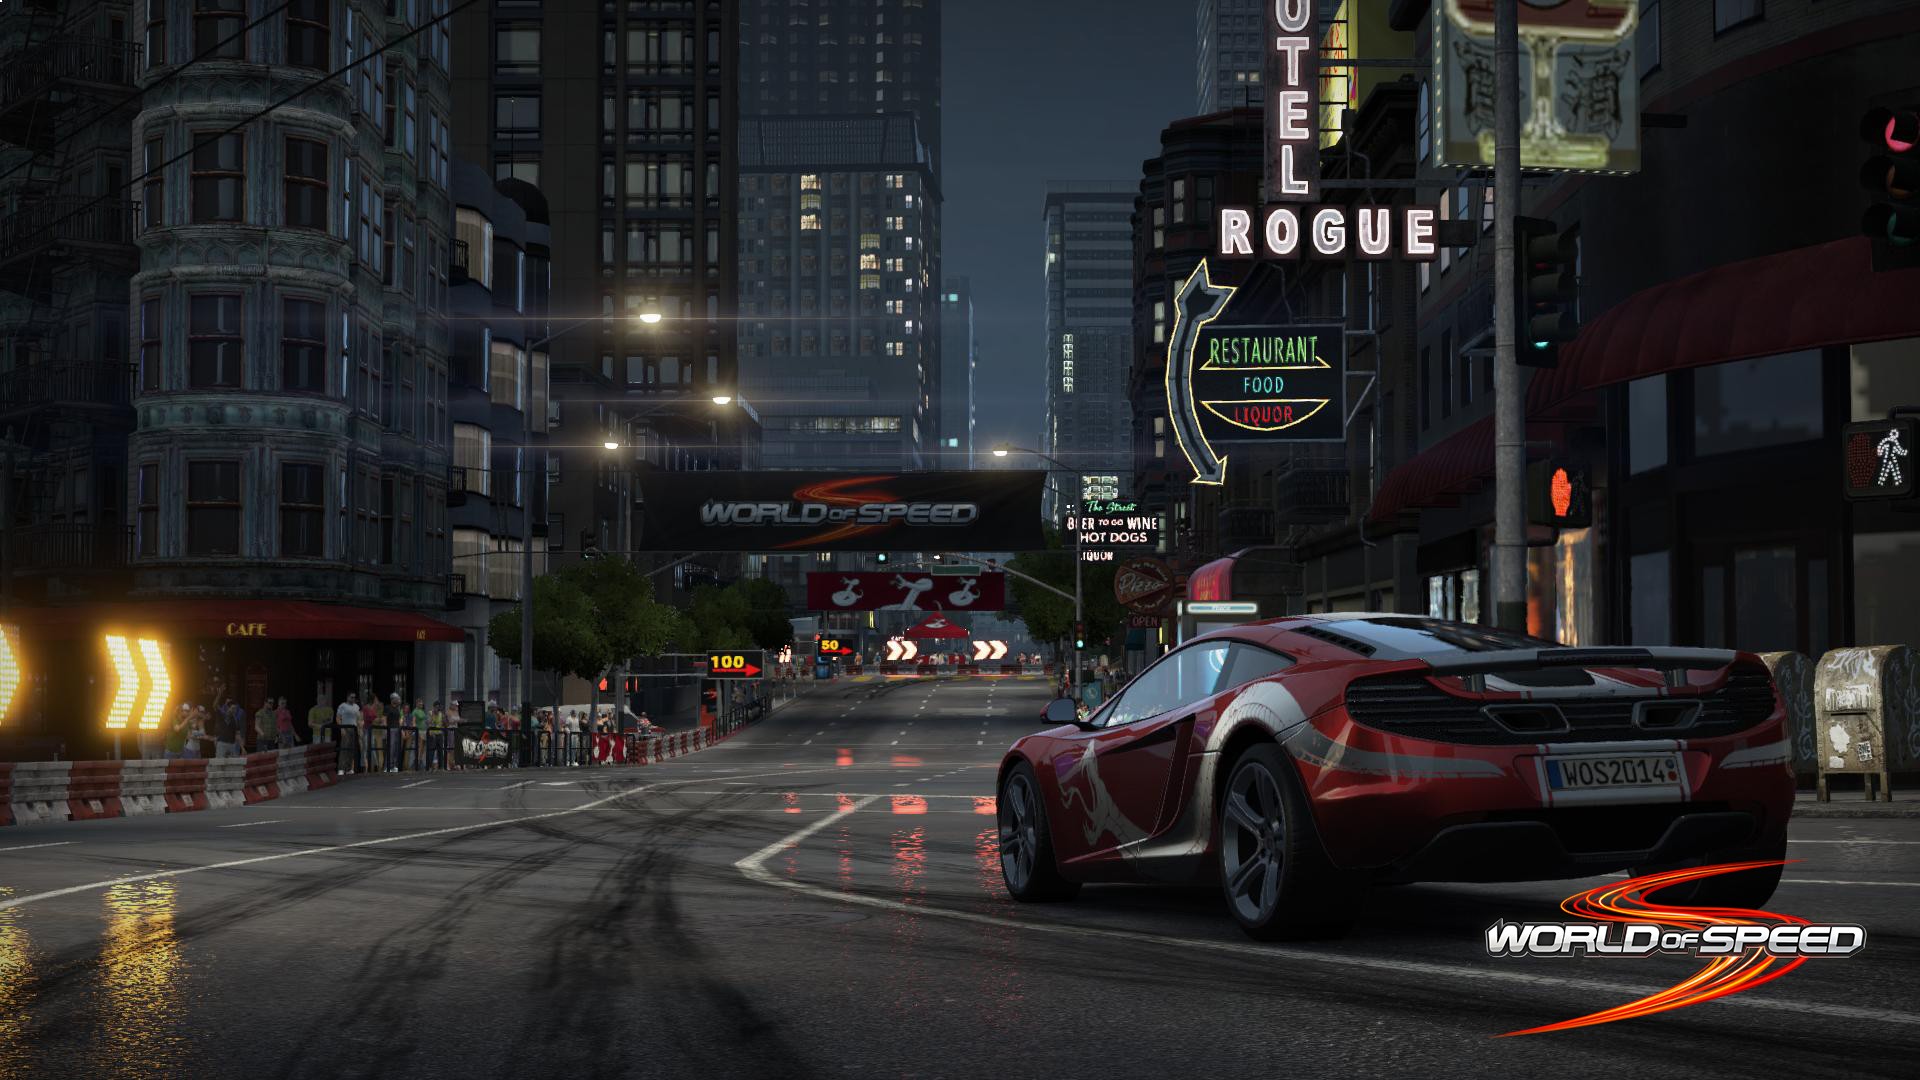 World of Speed Visual Teaser Shows Amazing Supercars and a Detailed San ...